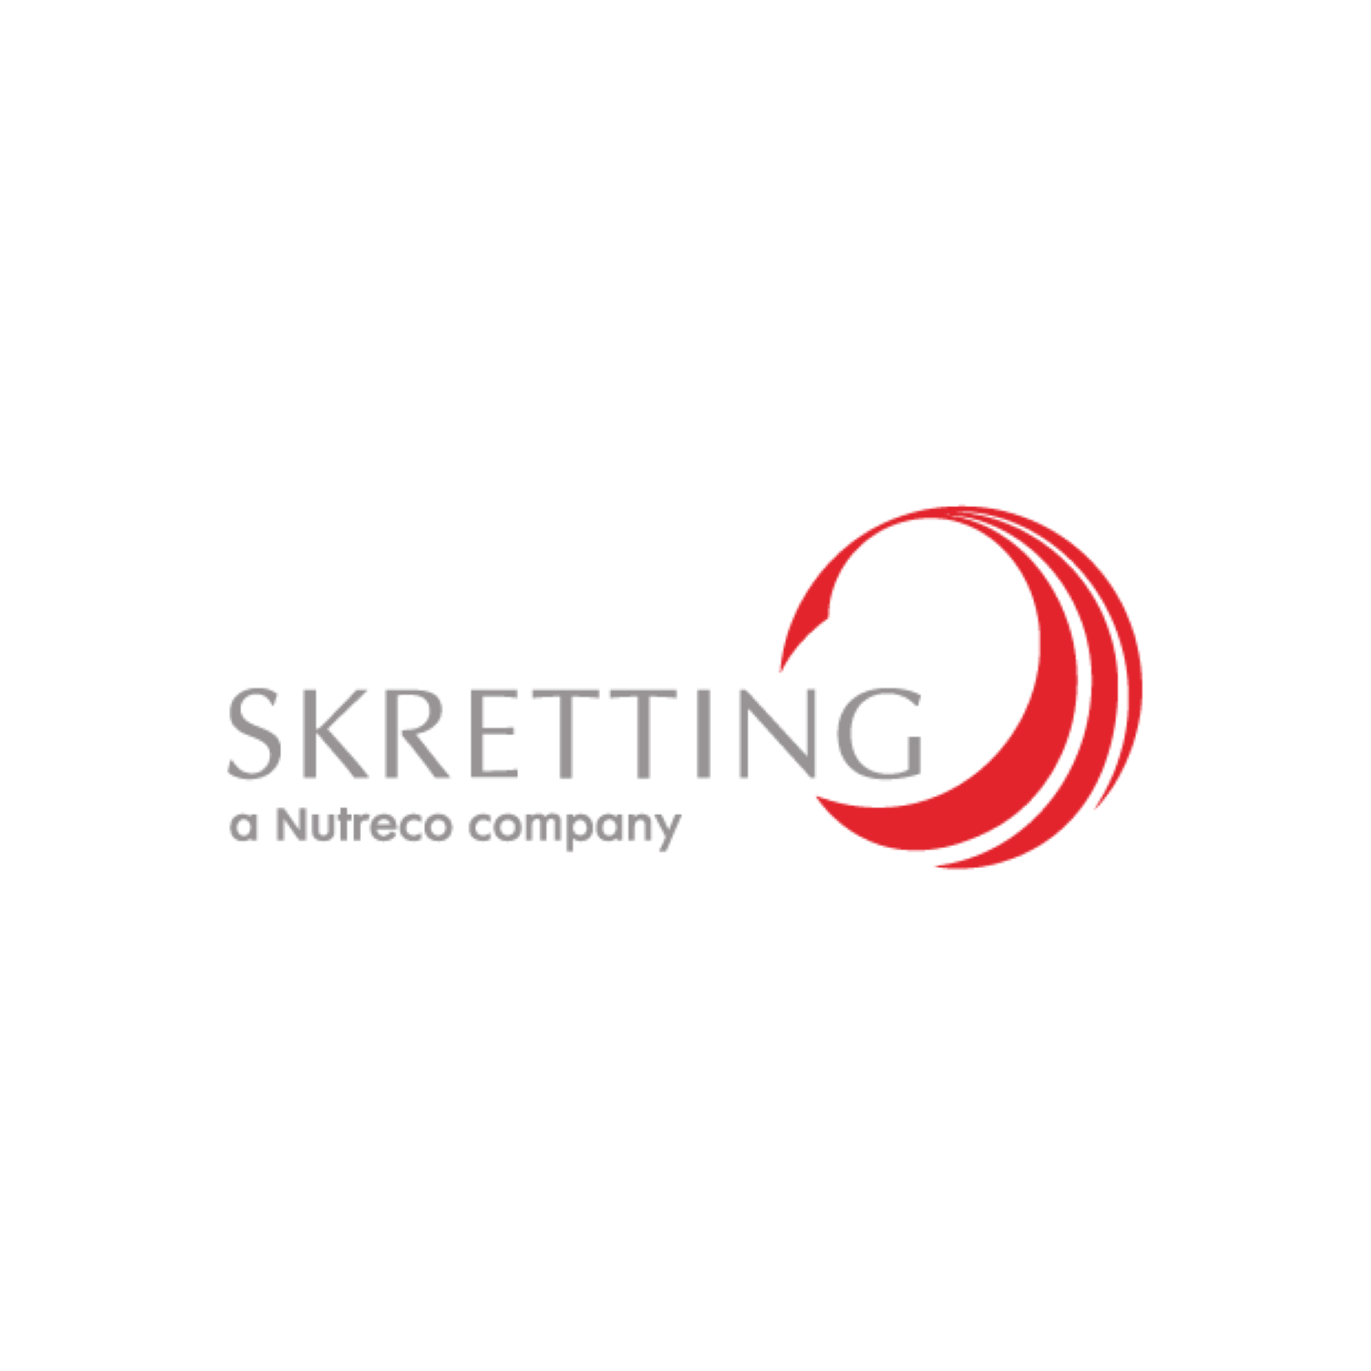 Skretting logo in grey and red